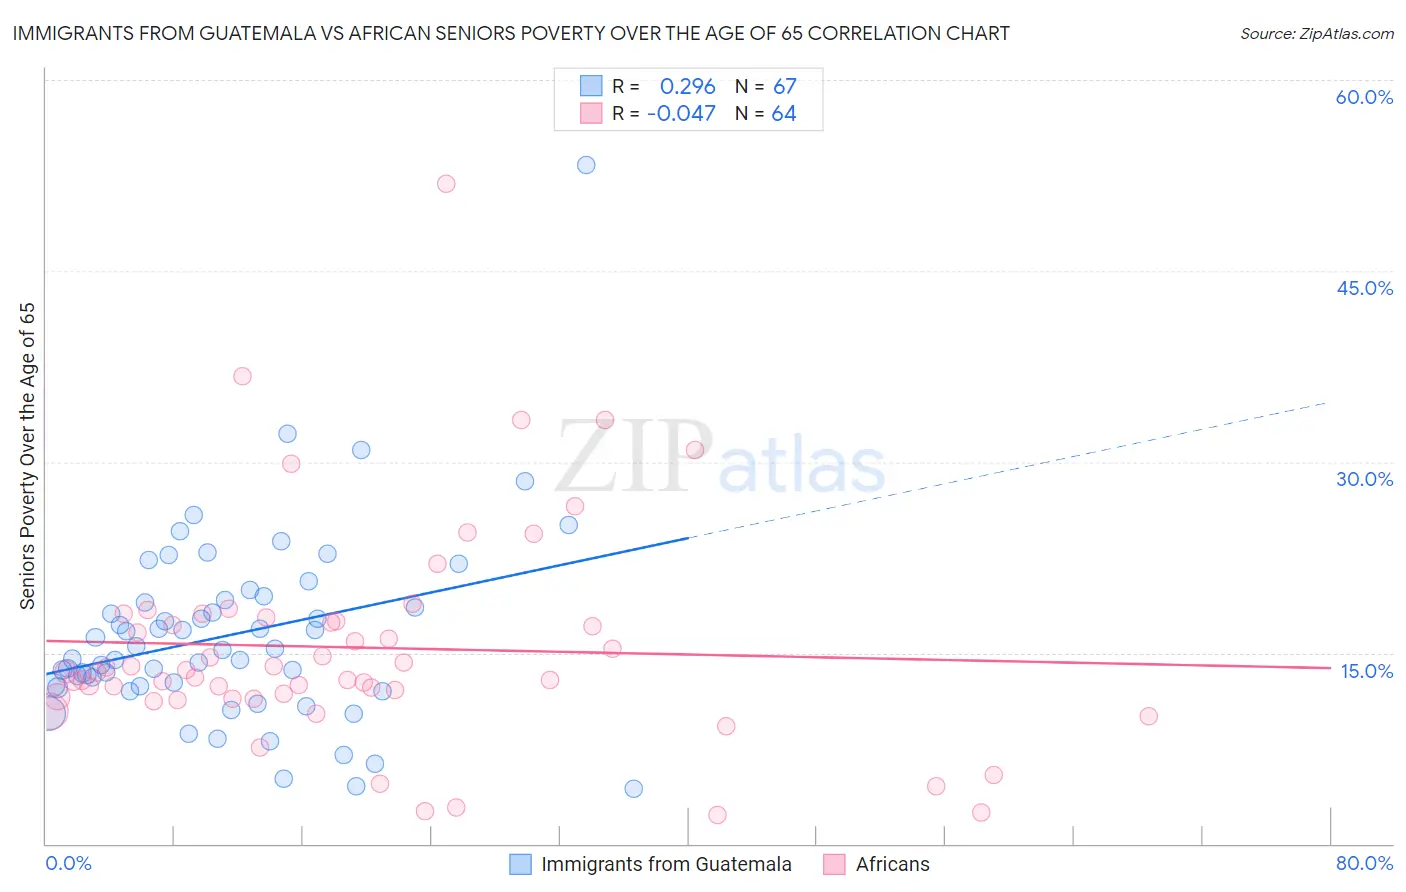 Immigrants from Guatemala vs African Seniors Poverty Over the Age of 65